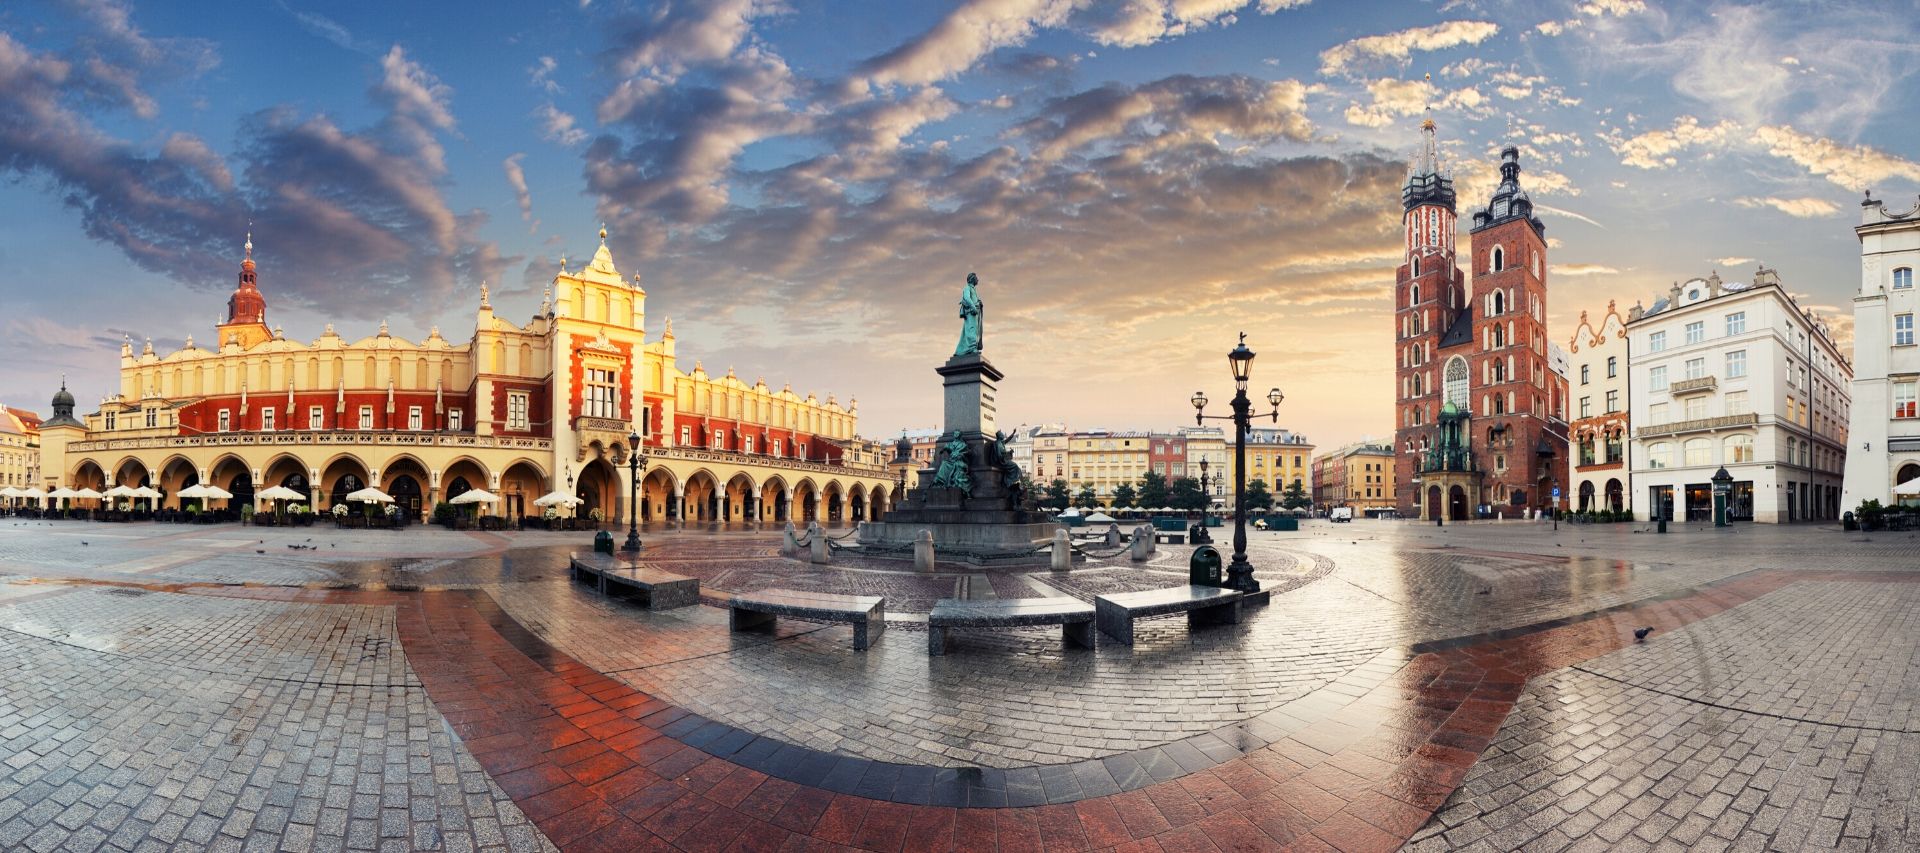 How to Spend the Perfect Weekend in Krakow